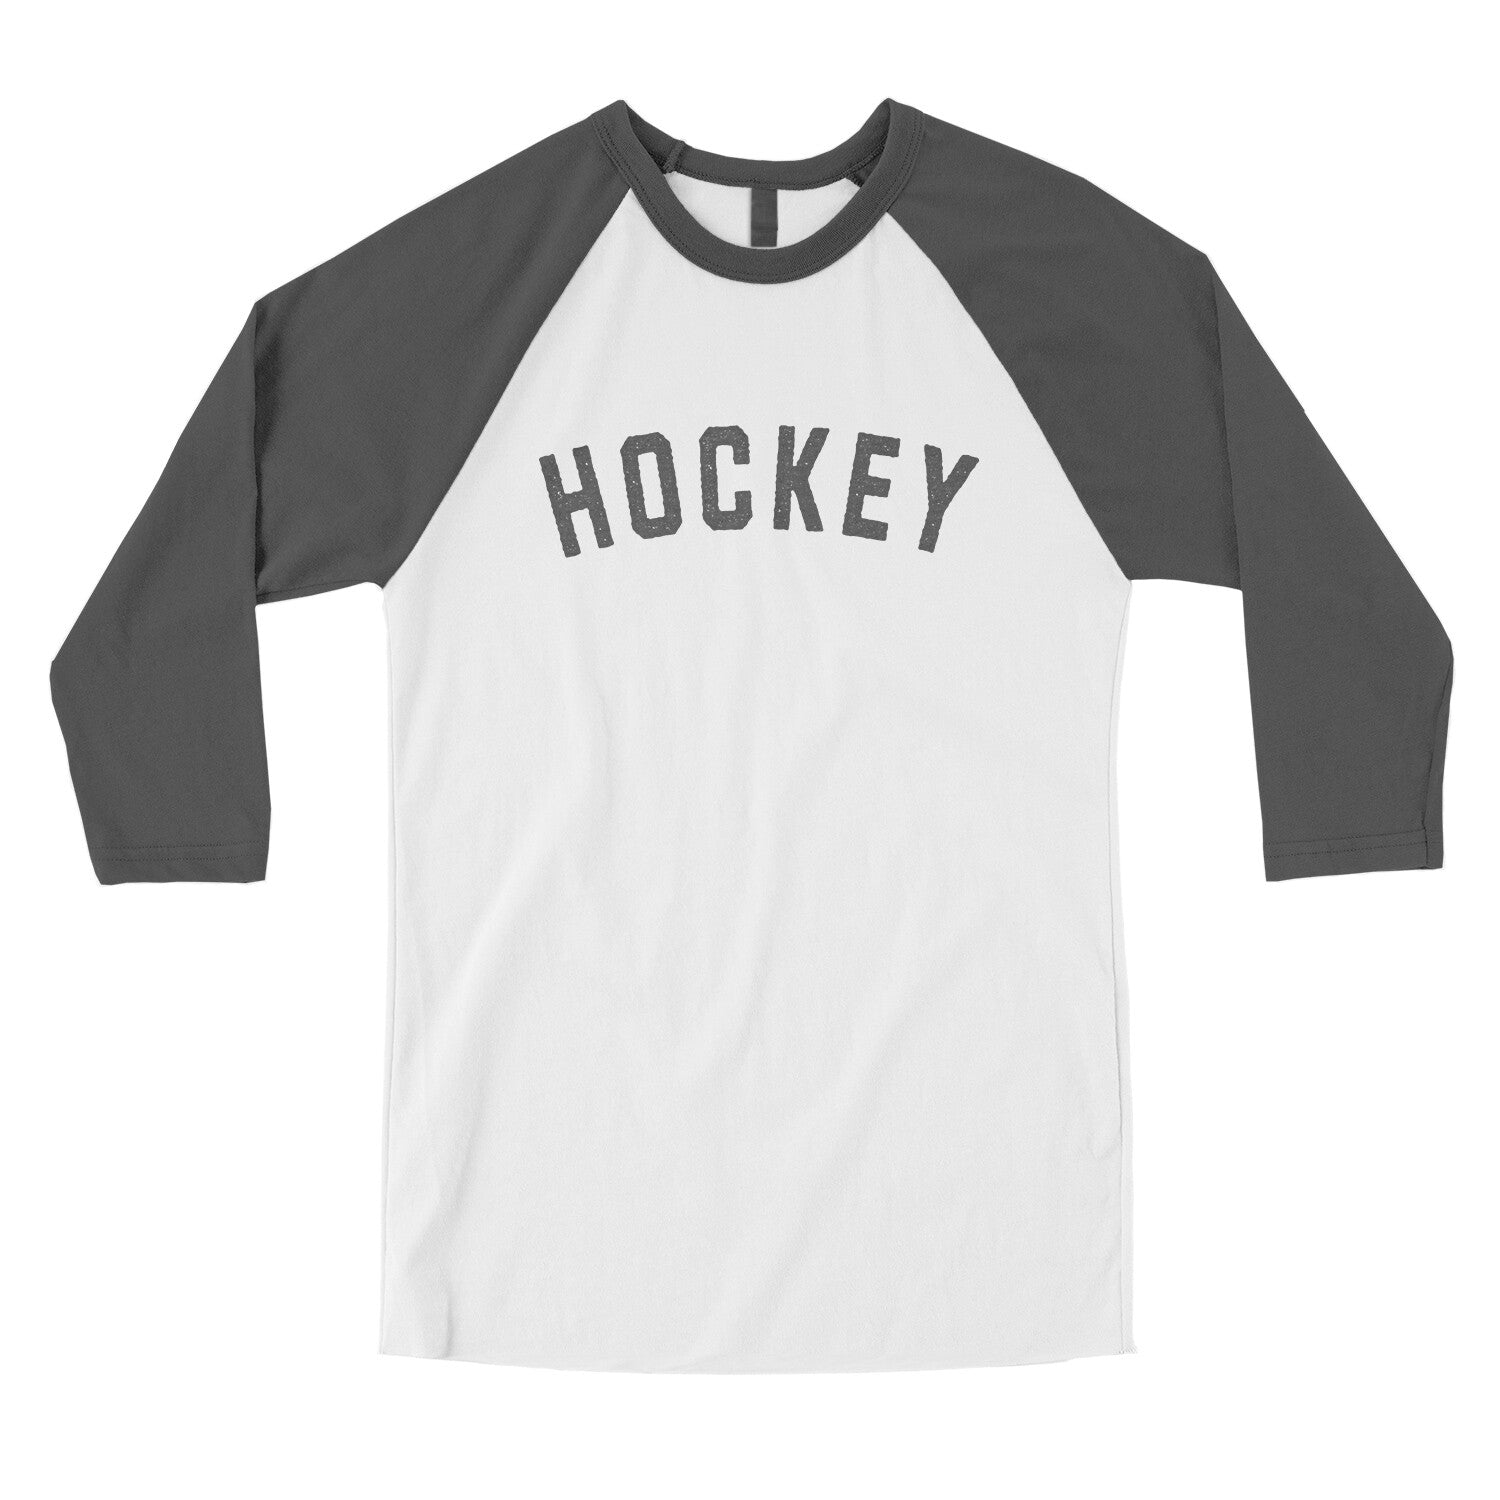 Hockey in White with Asphalt Color